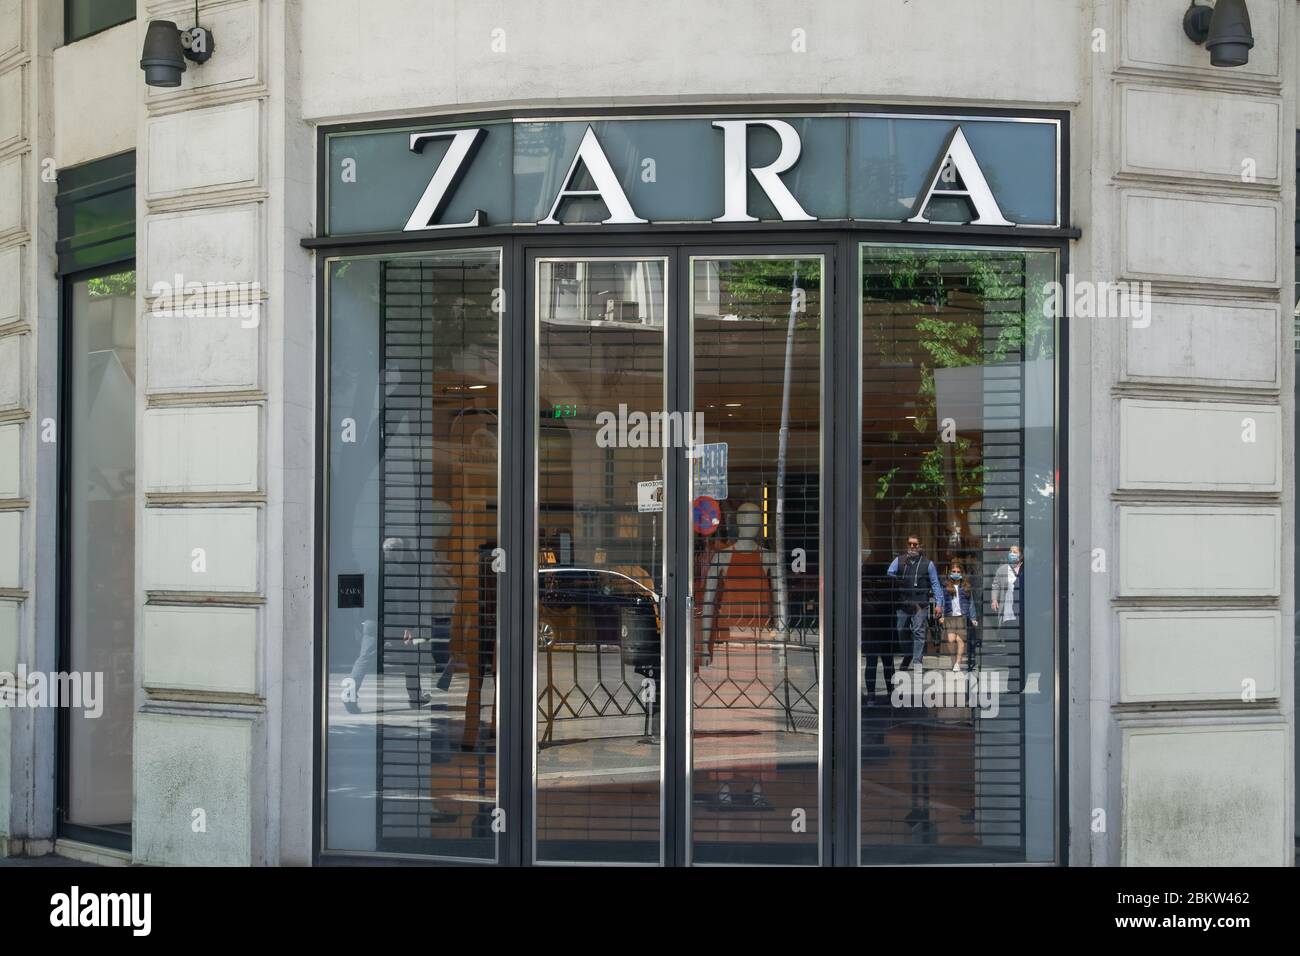 Zara Store Entrance High Resolution Stock Photography and Images - Alamy